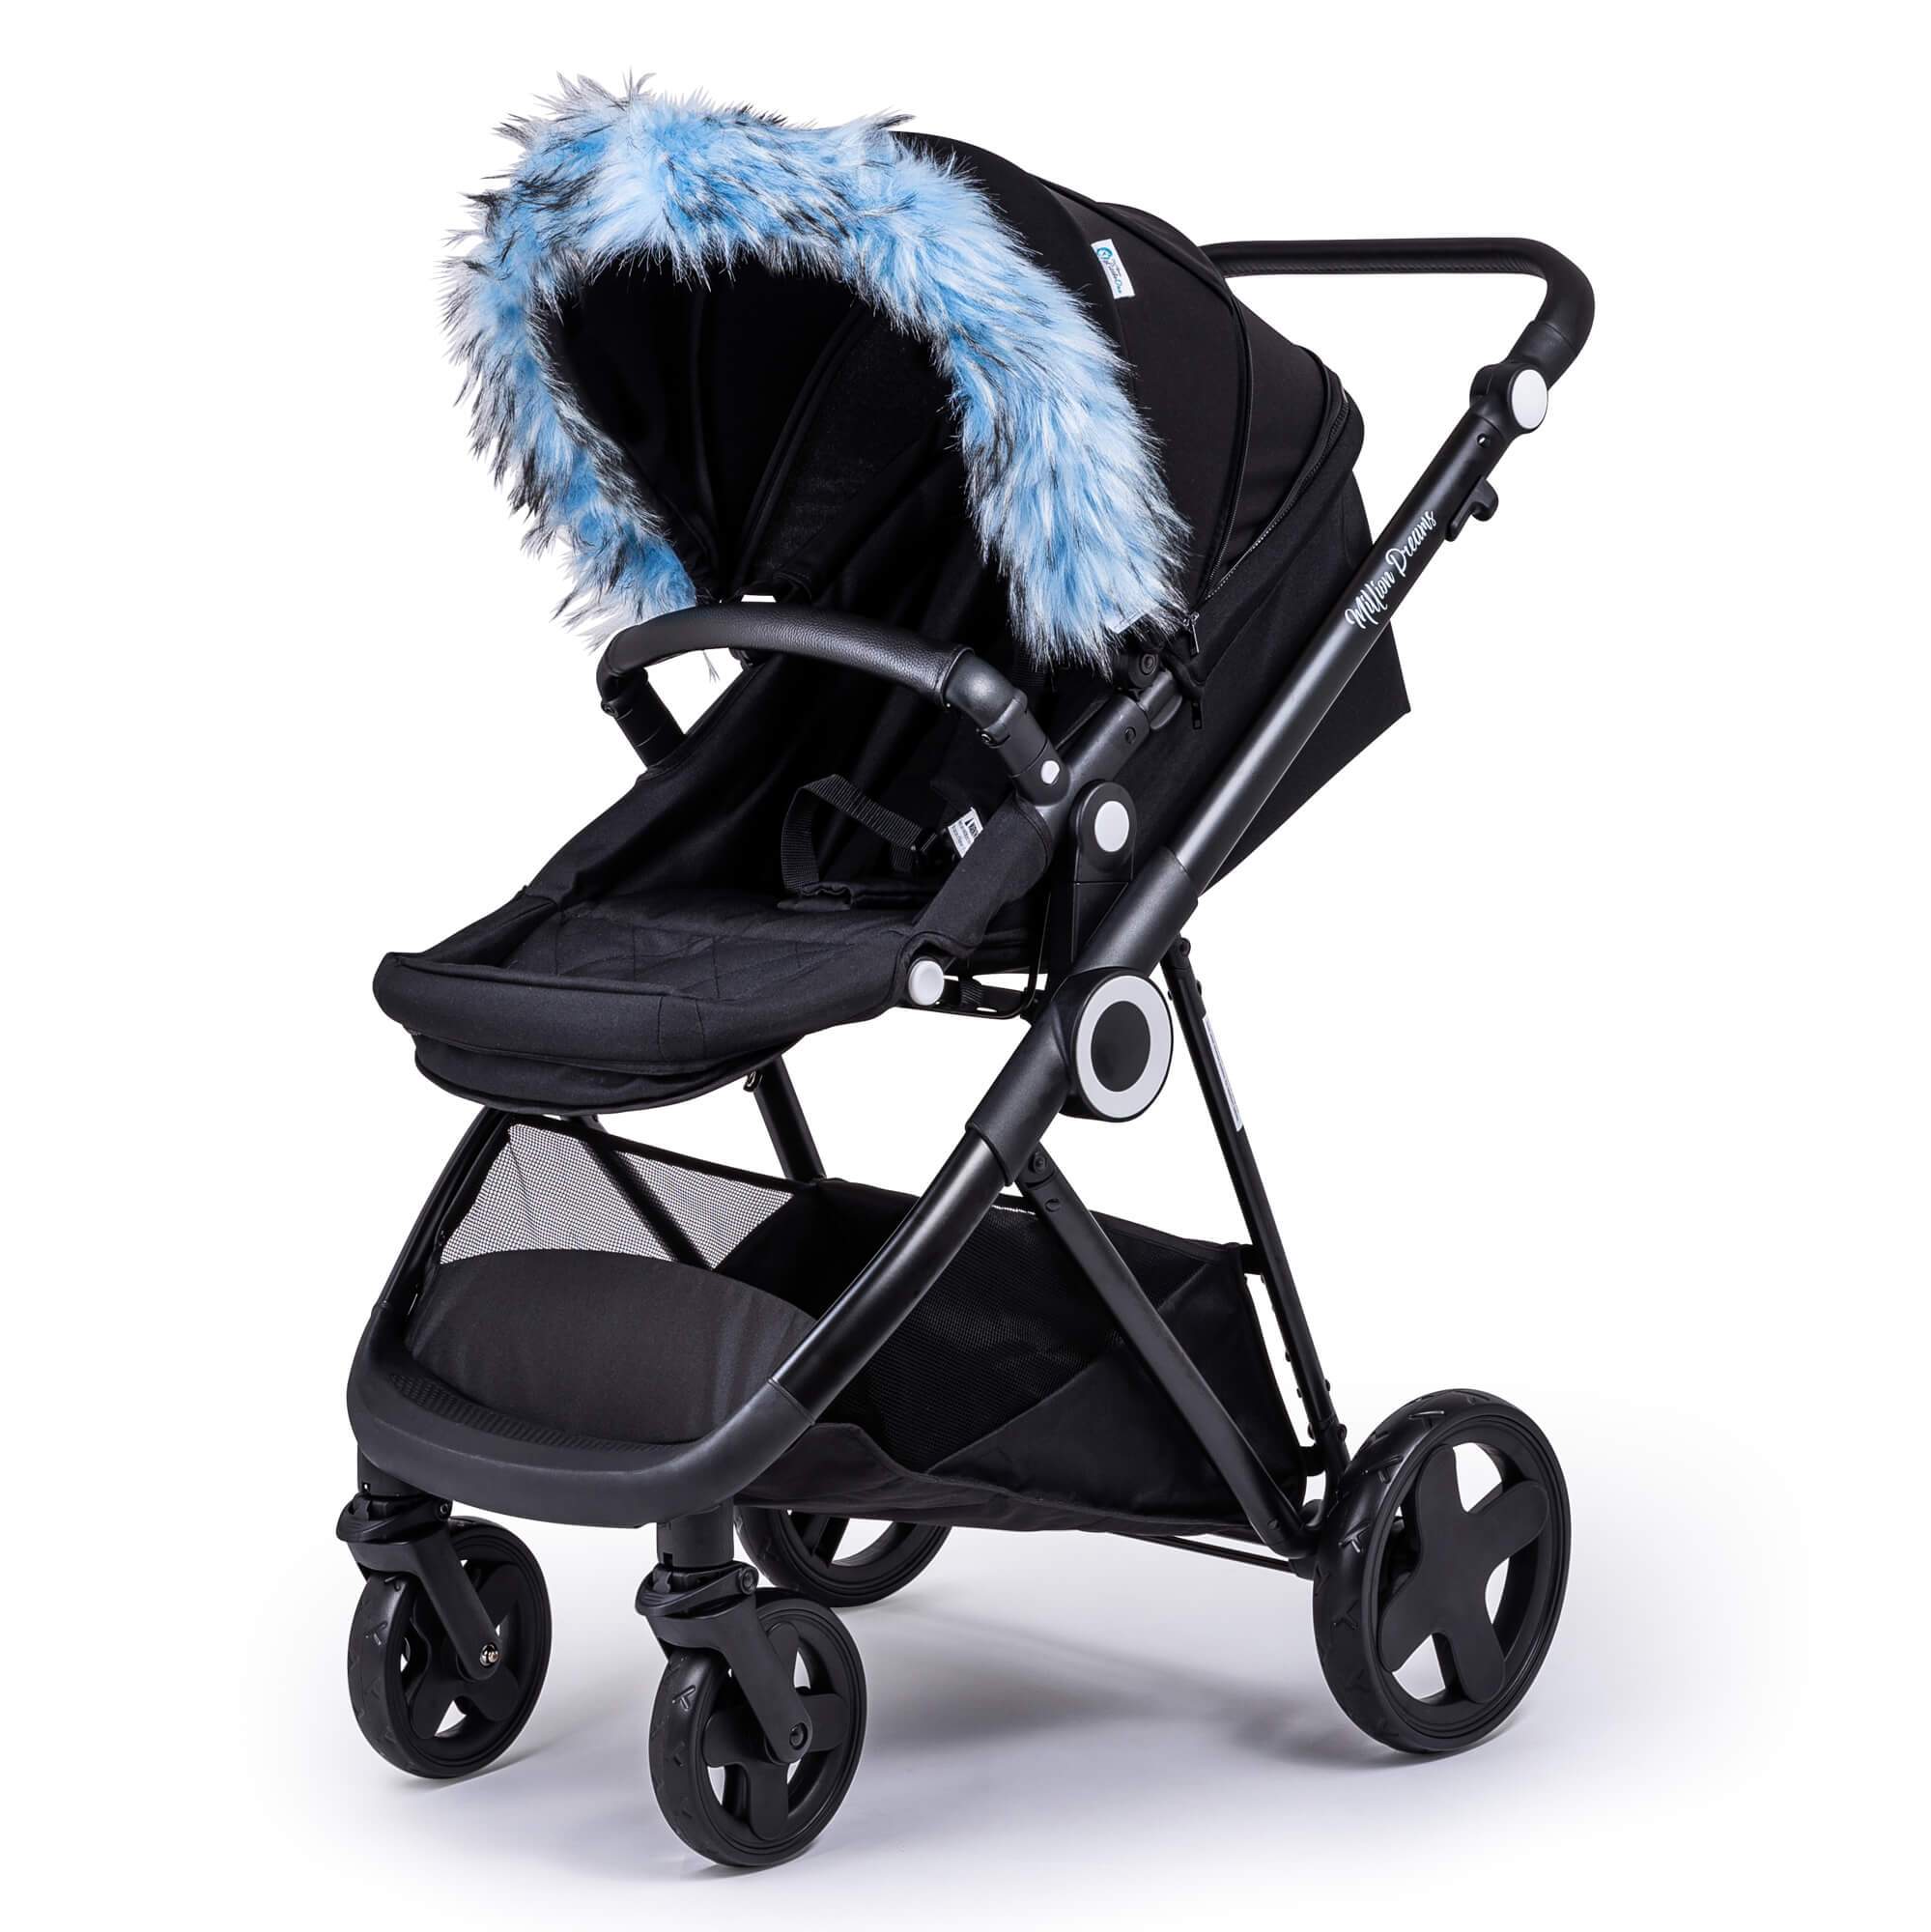 Pram Fur Hood Trim Attachment for Pushchair Compatible with Mima - Light Blue / Fits All Models | For Your Little One